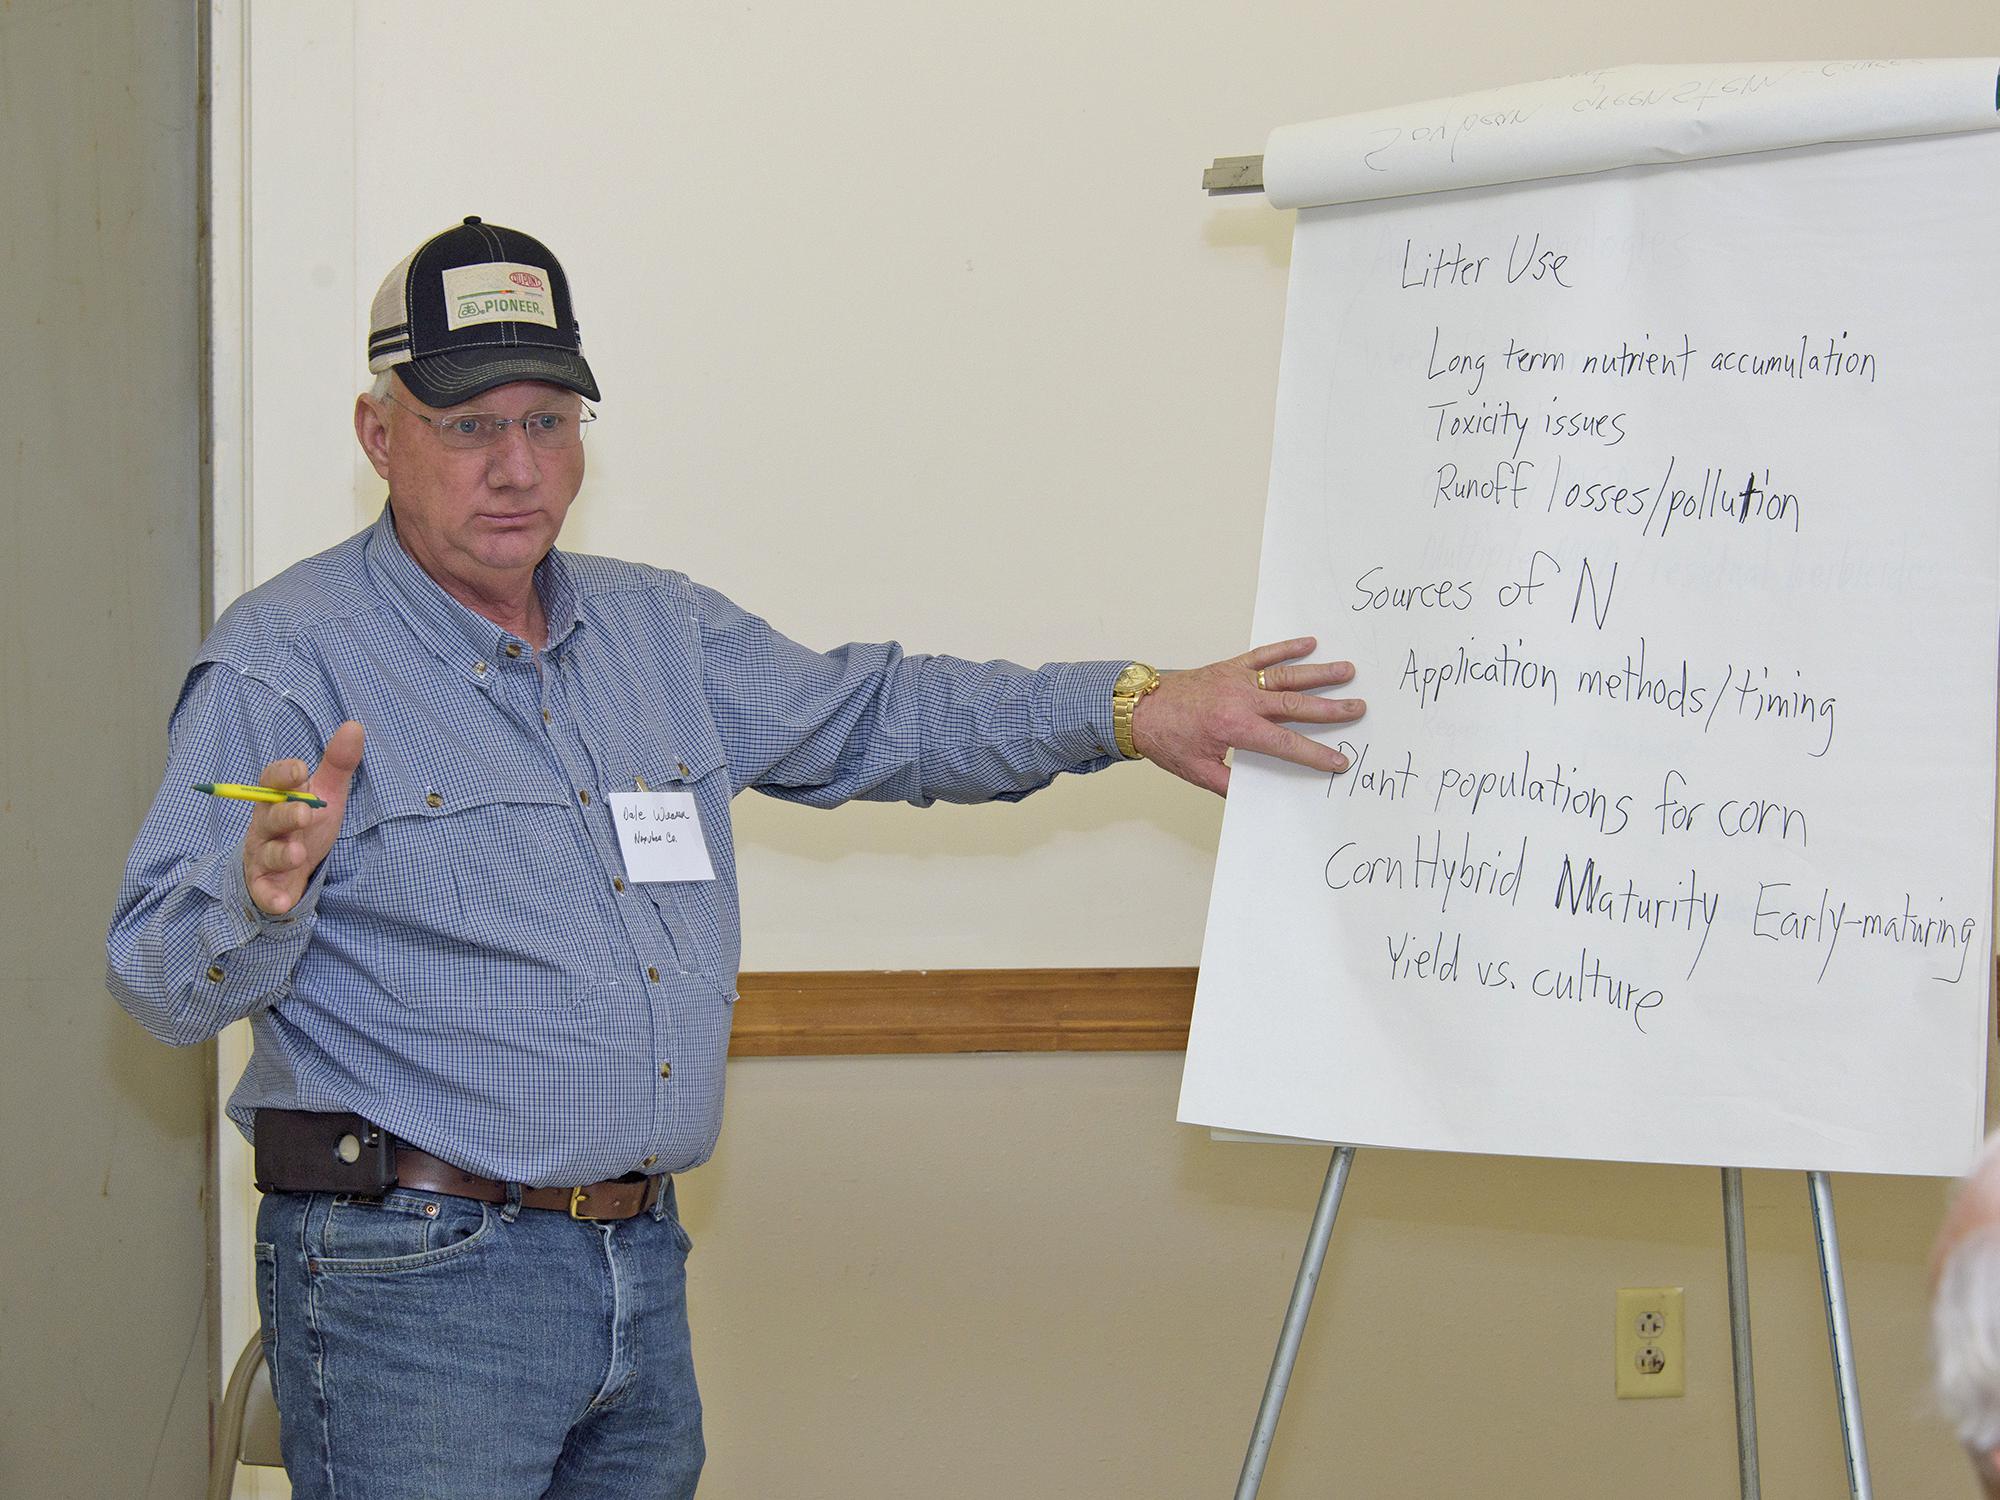 Dale Weaver of Noxubee County leads the grain crops discussion at the Producer Advisory Council meeting in Verona, Mississippi, on Feb. 16, 2017. Mississippi State University Extension Service and the Mississippi Agricultural and Forestry Experiment Station host the annual meeting. (Photo by MSU Extension Service/Kevin Hudson)